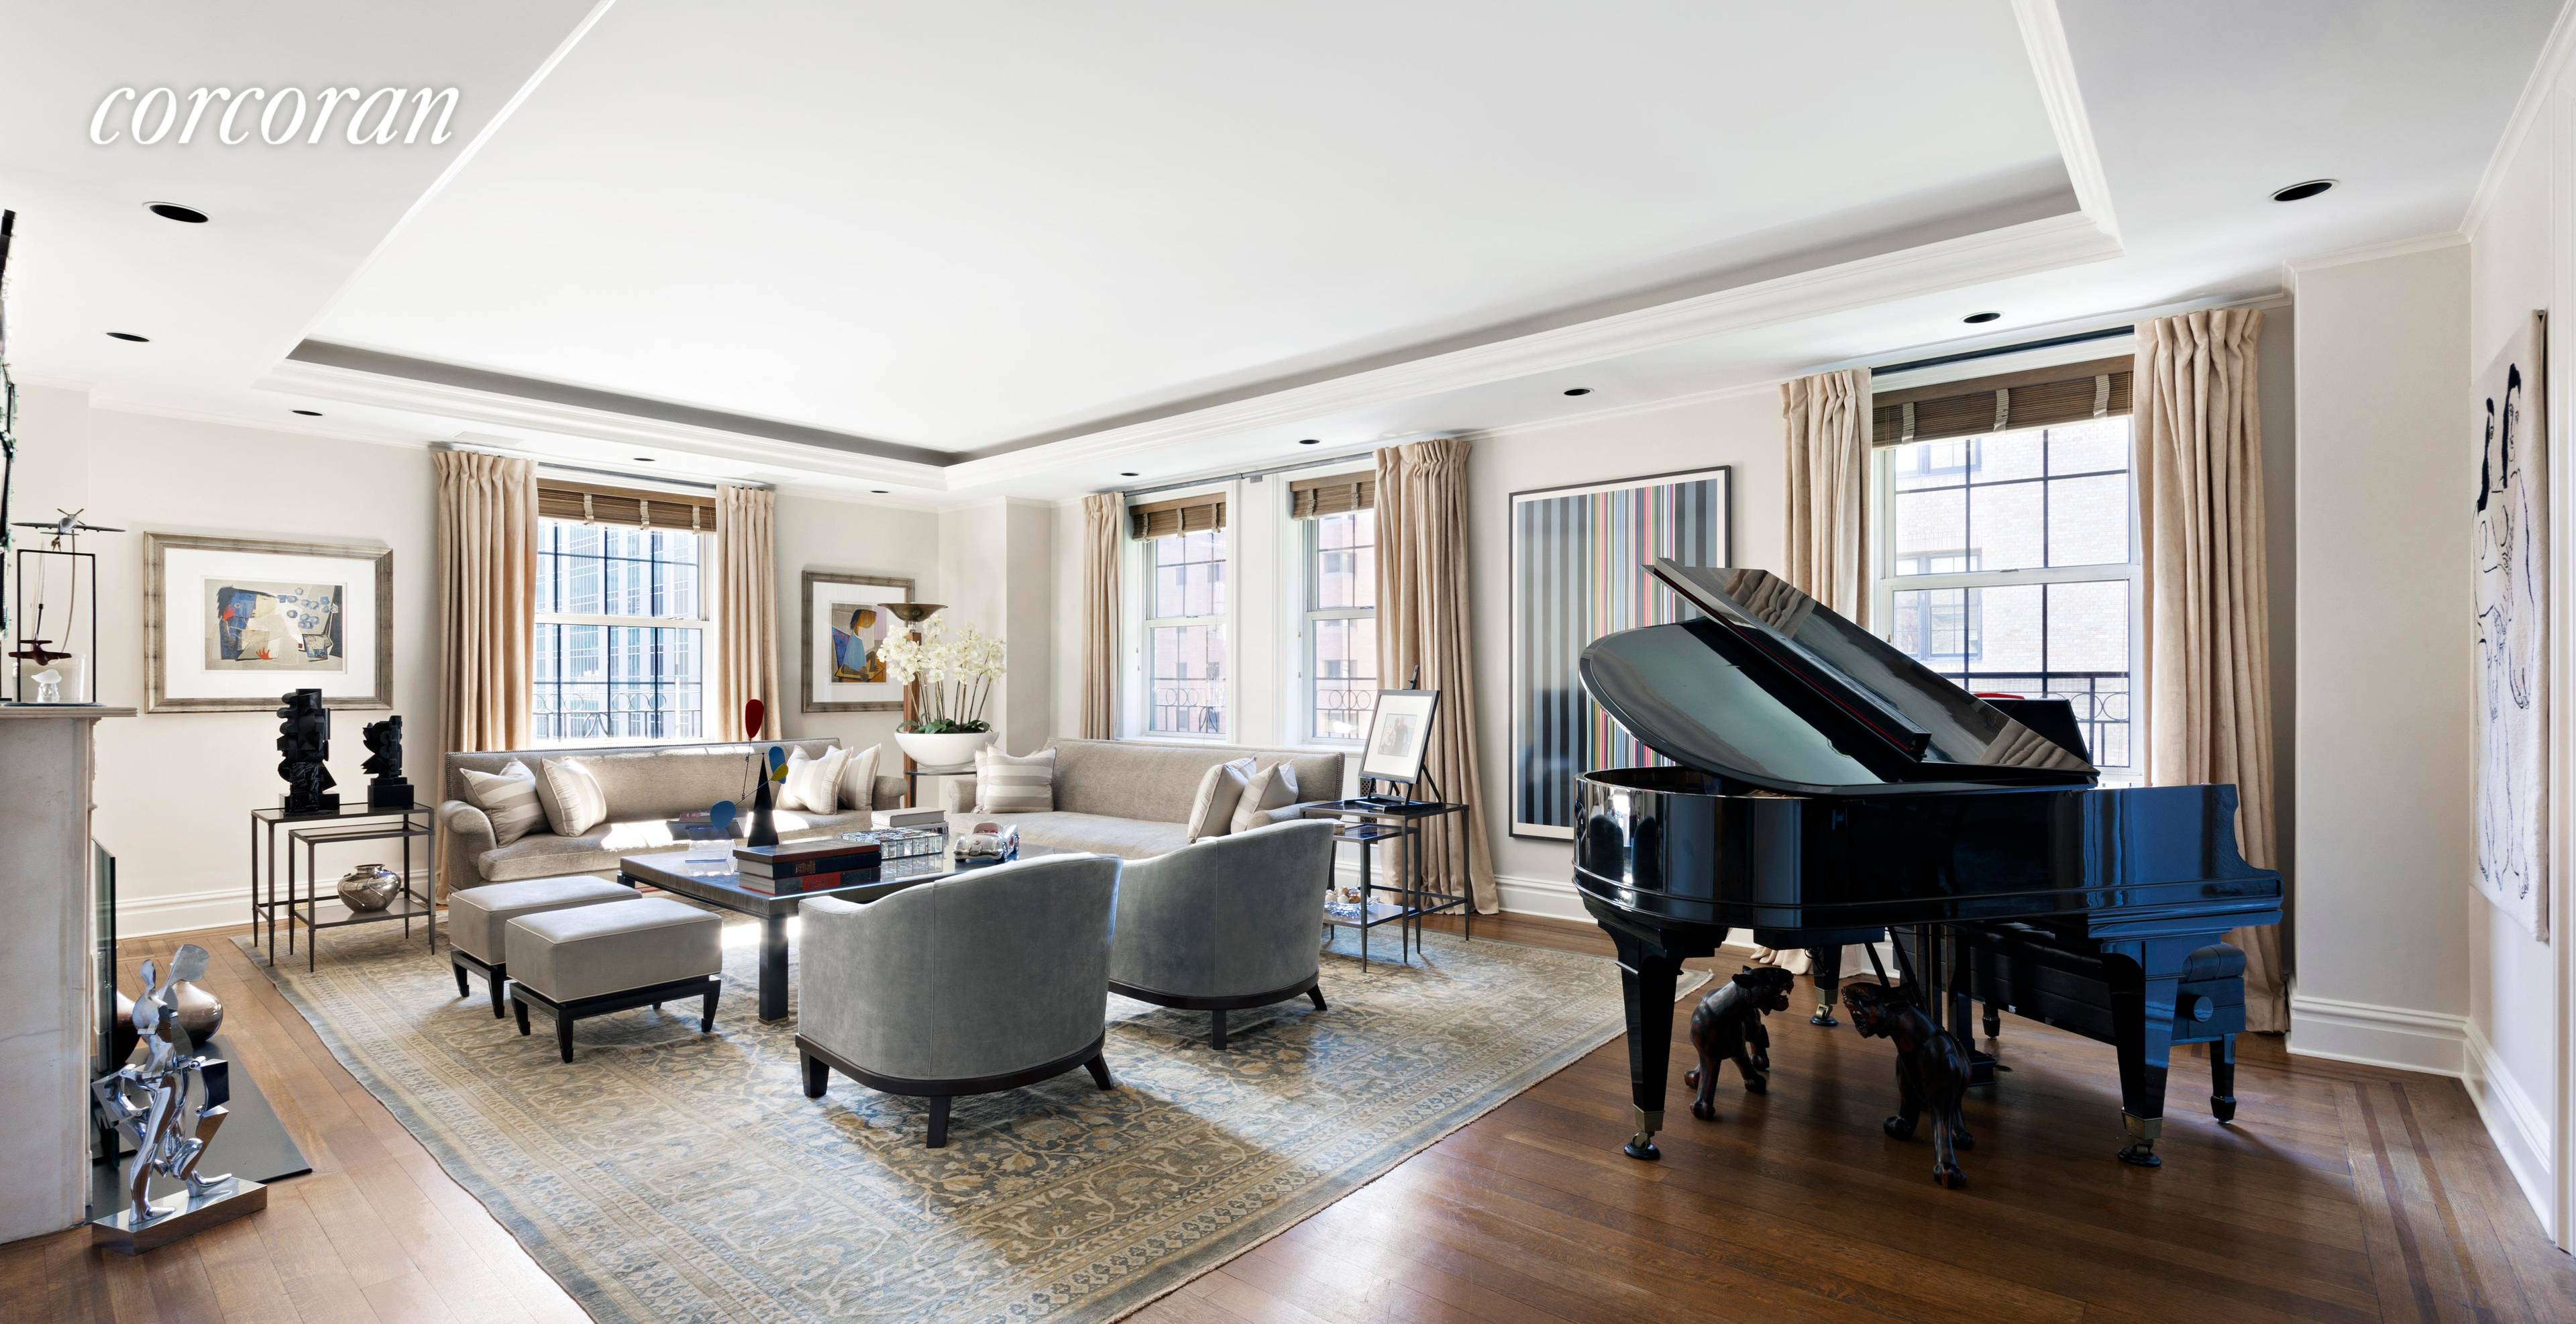 The ultimate opportunity for sophisticated living in one of Park Avenue's most prestigious coop buildings.